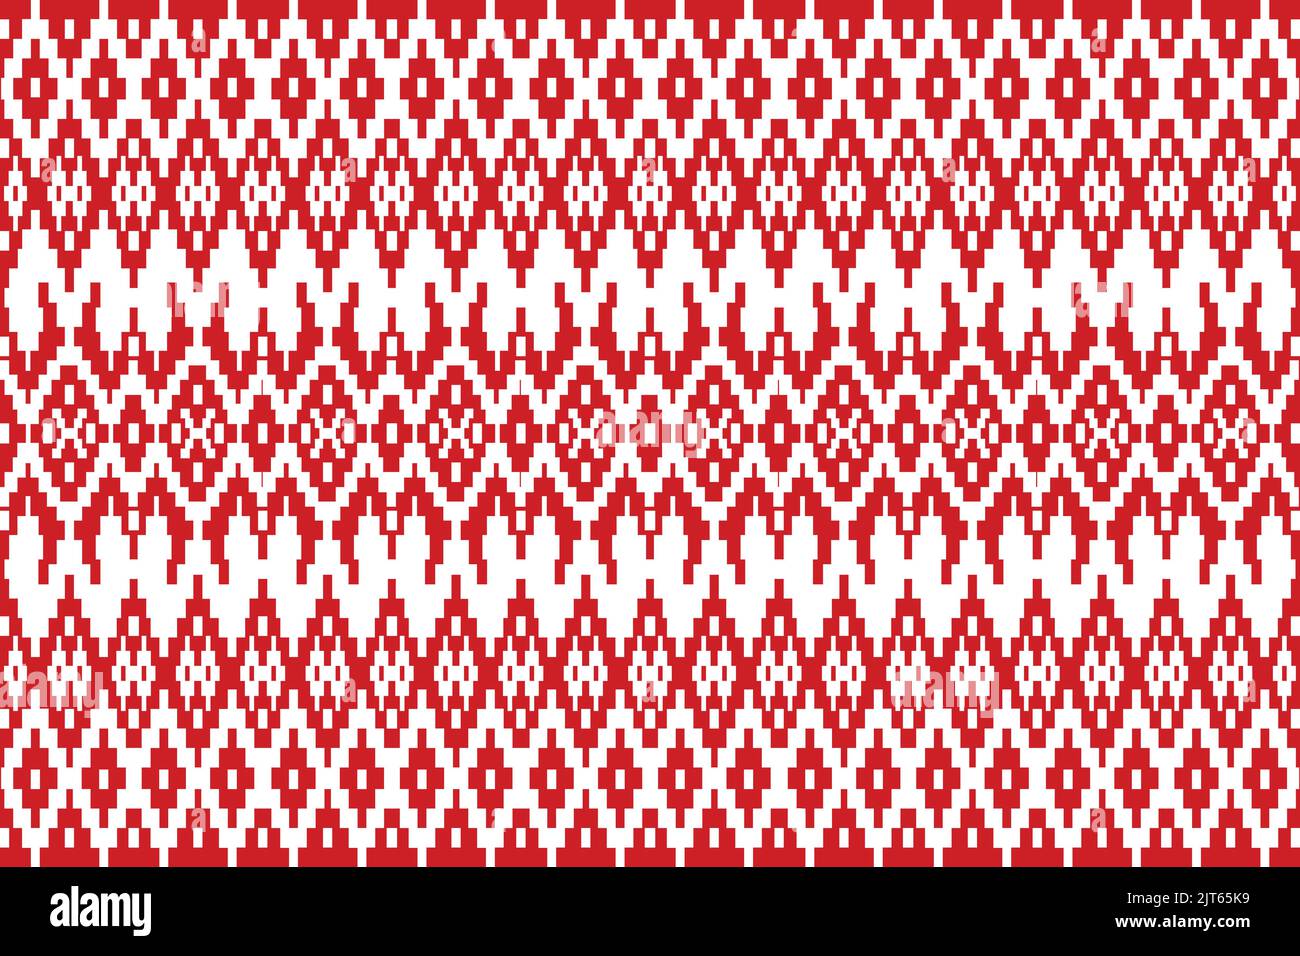 Belarus National Pattern - Belarus flag pattern - Red and White Pattern embroidery textile seamless pattern Stock Vector